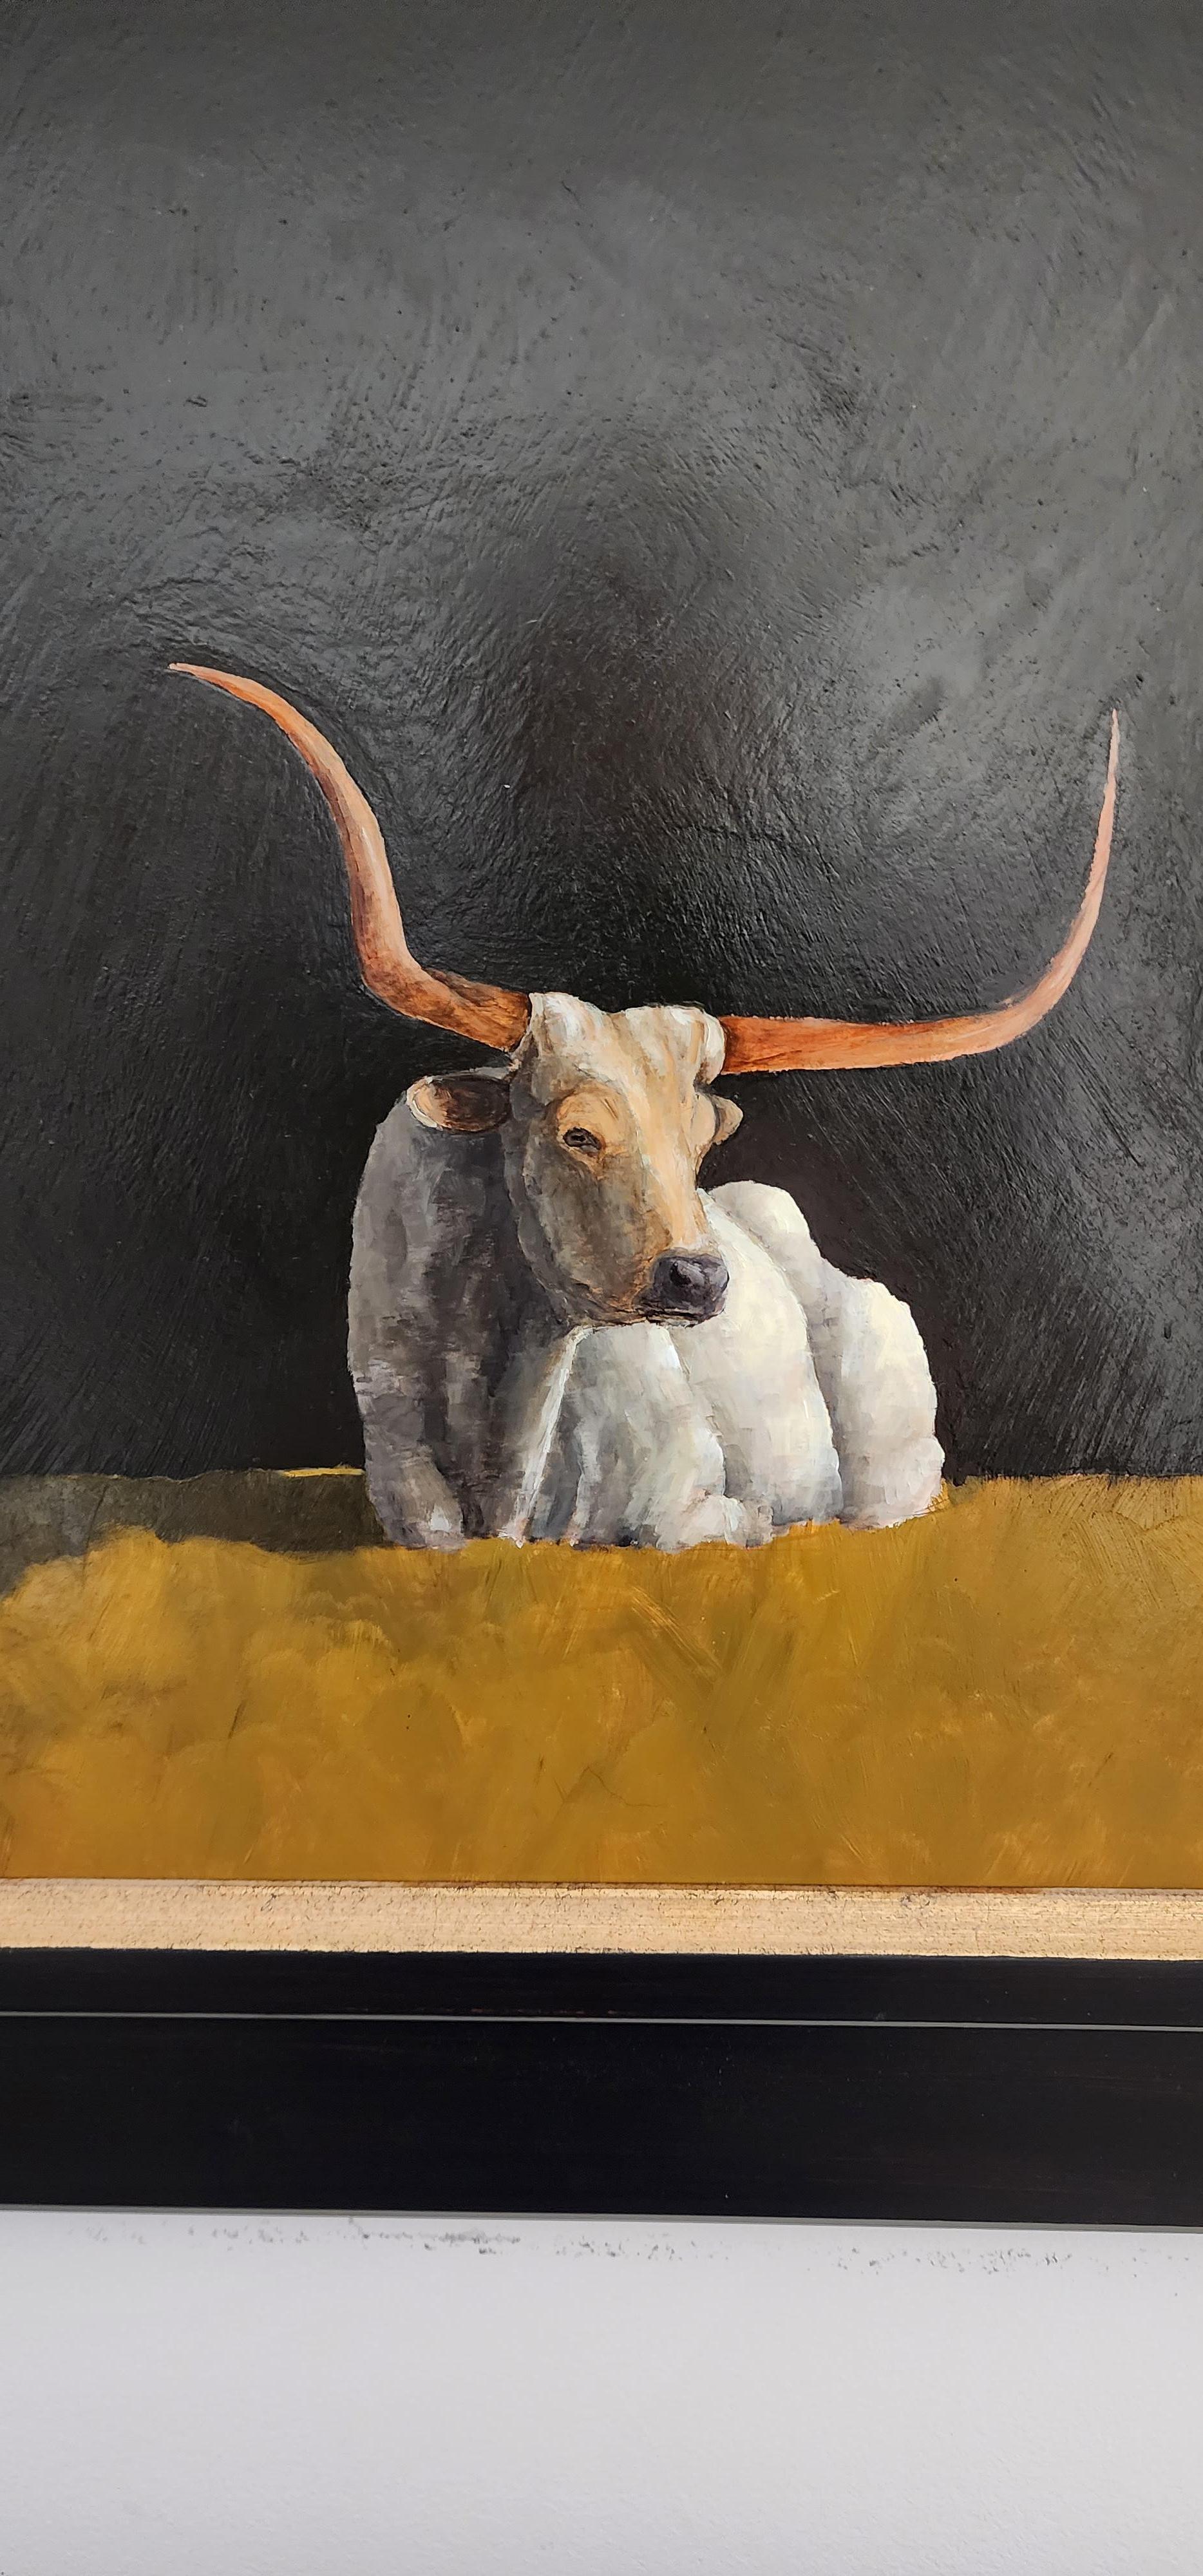   LOOK FOR FREE SHIPPING AT CHECKOUT. IF NOT AVAILABLE GALLERY PAYS FOR SHIPPING IN USA.   ALSO SHOWN ARE OTHER AVAILABLE PAINTINGS.

Majestic Longhorn  is an oil painting that was completed in February 2023.. It has a  custom made frame that